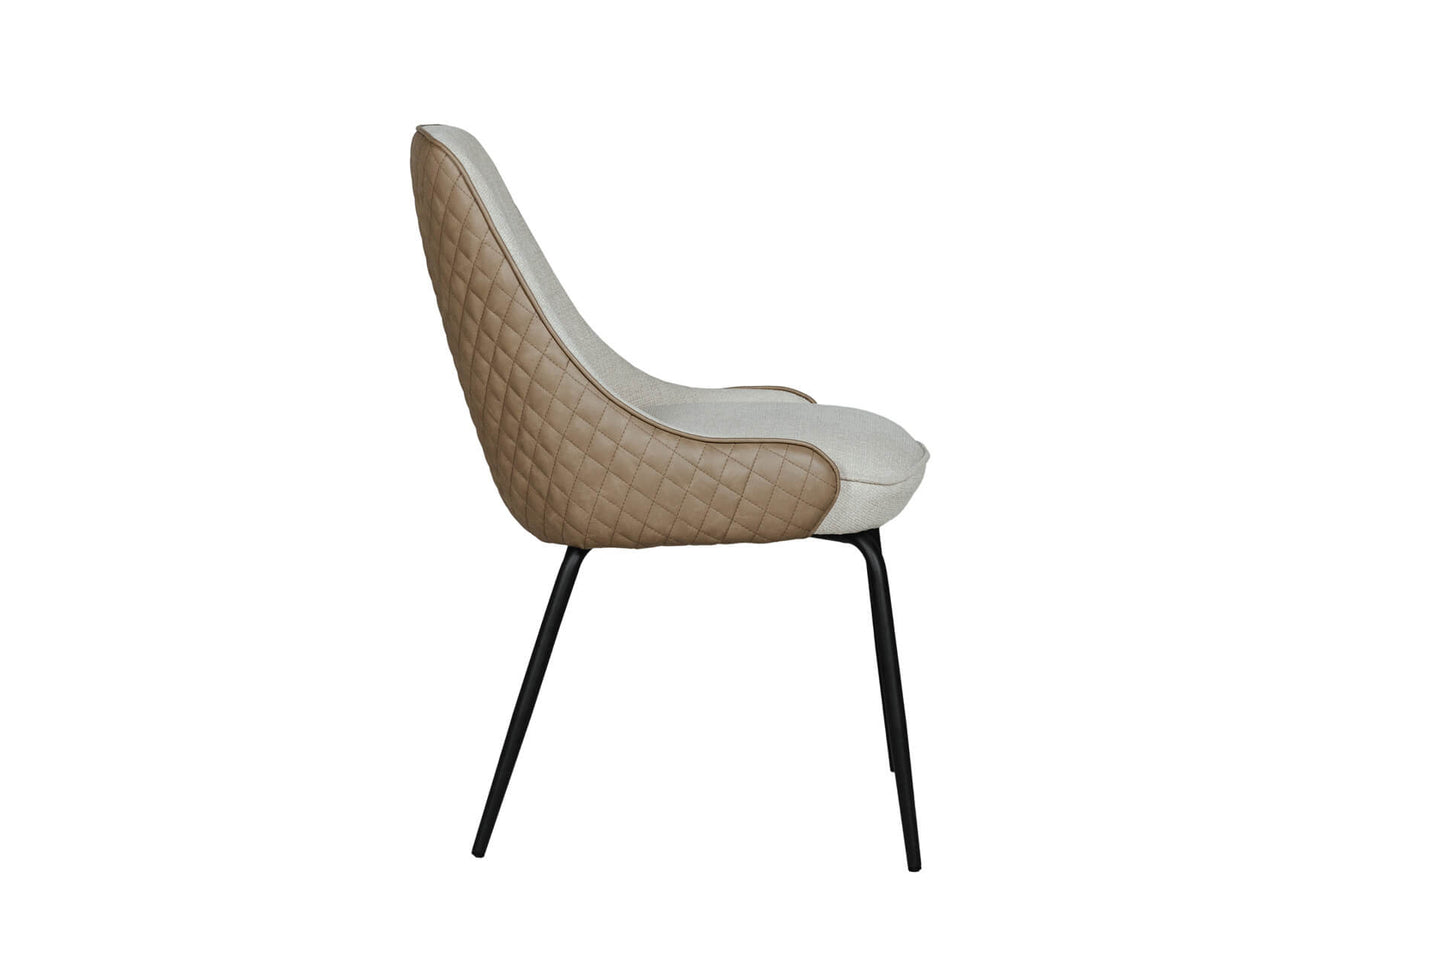 Sadia Dining Chair - Biscuit